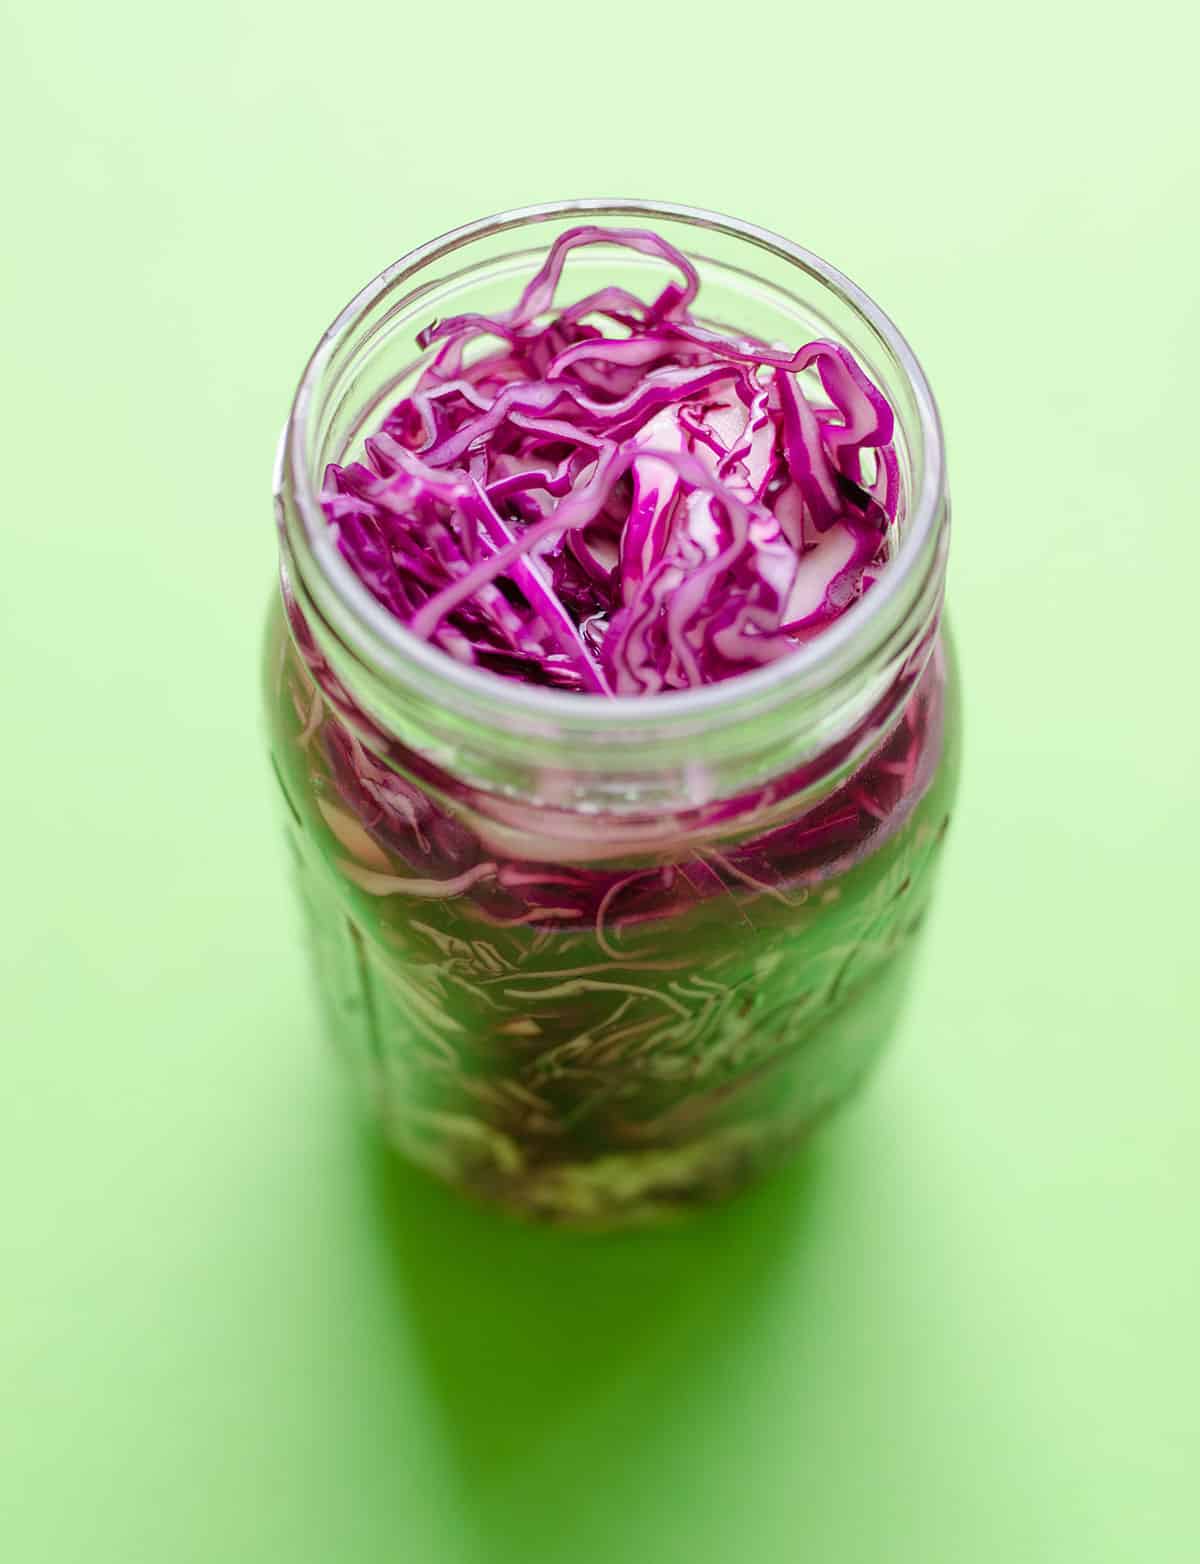 Shredded red cabbage in a jar.